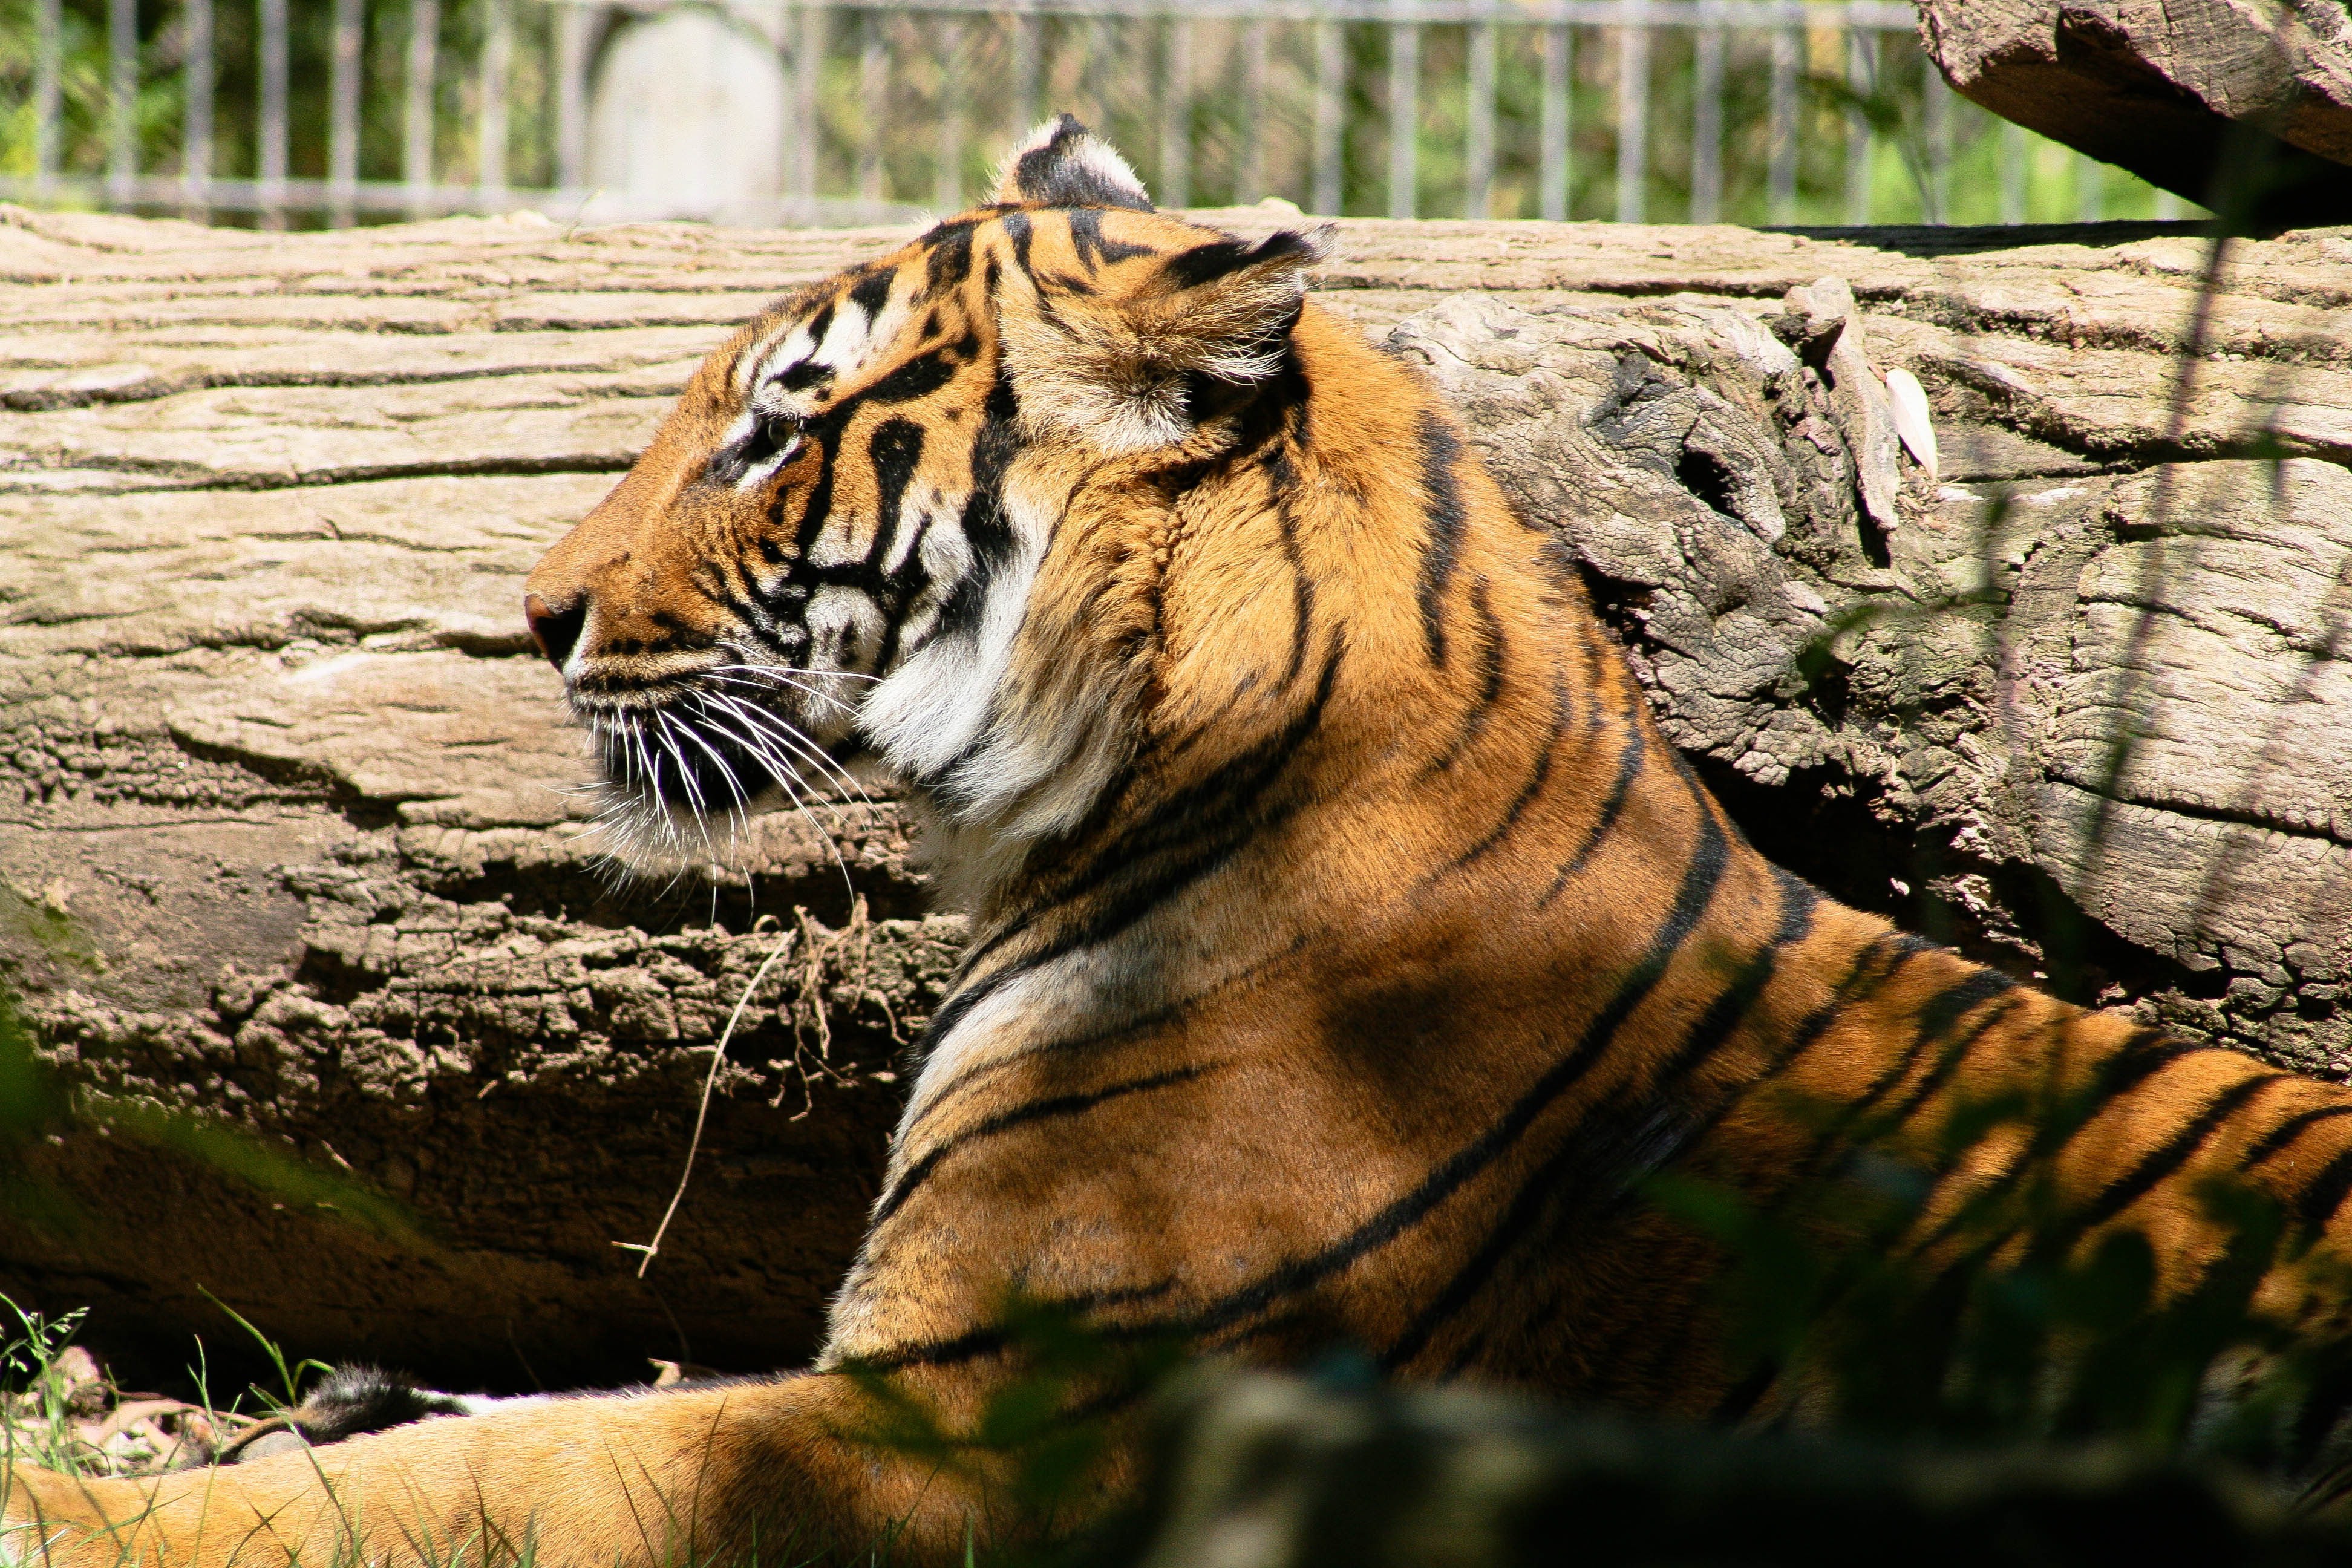 A large tiger lying down by a tree log in its caged-off area at the zoo.